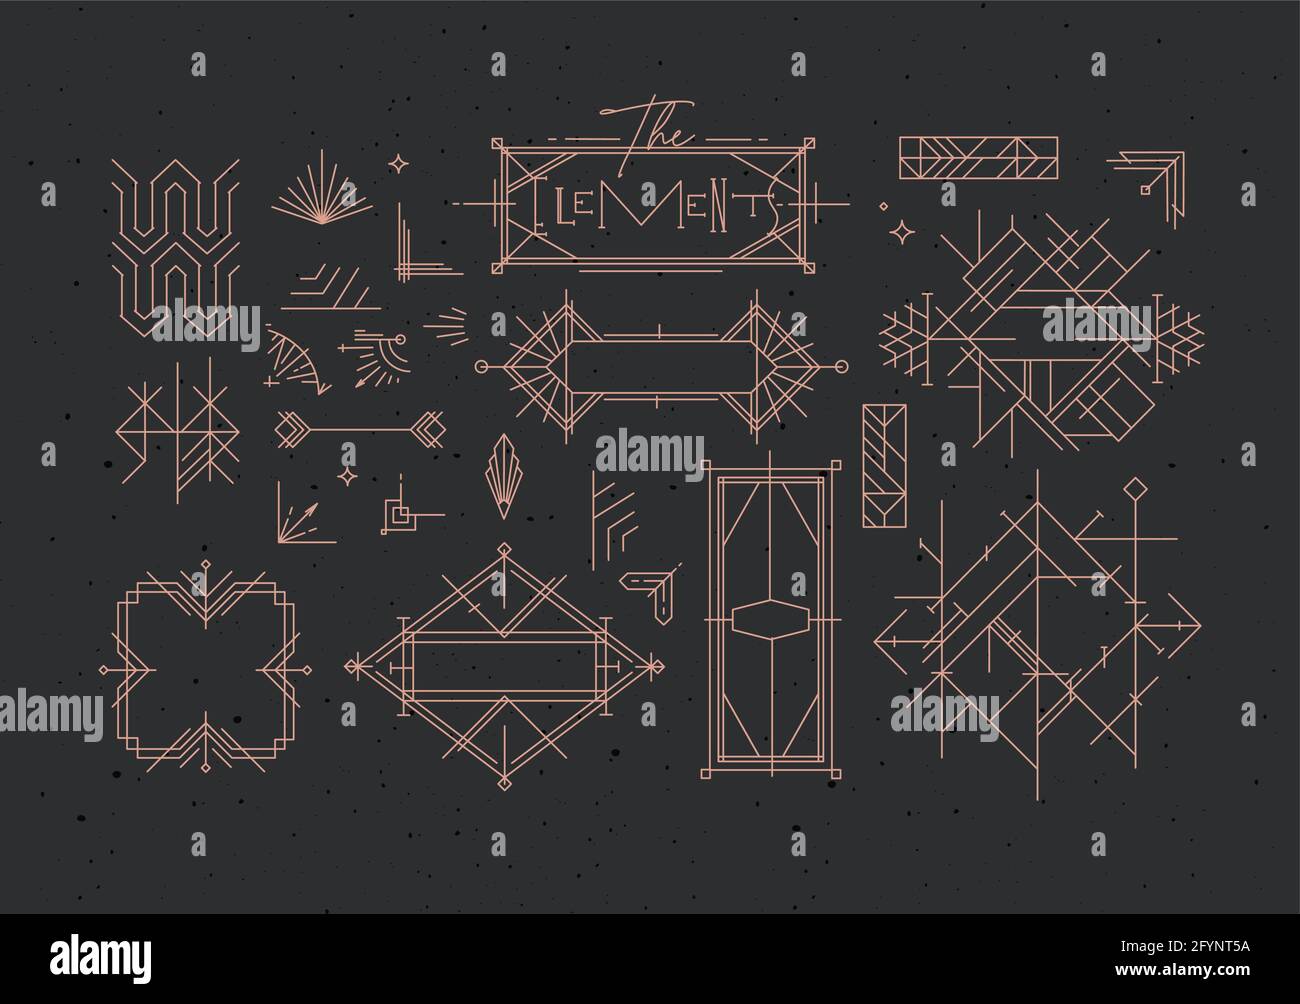 Art deco vintage design elements drawing in line style on dark background Stock Vector